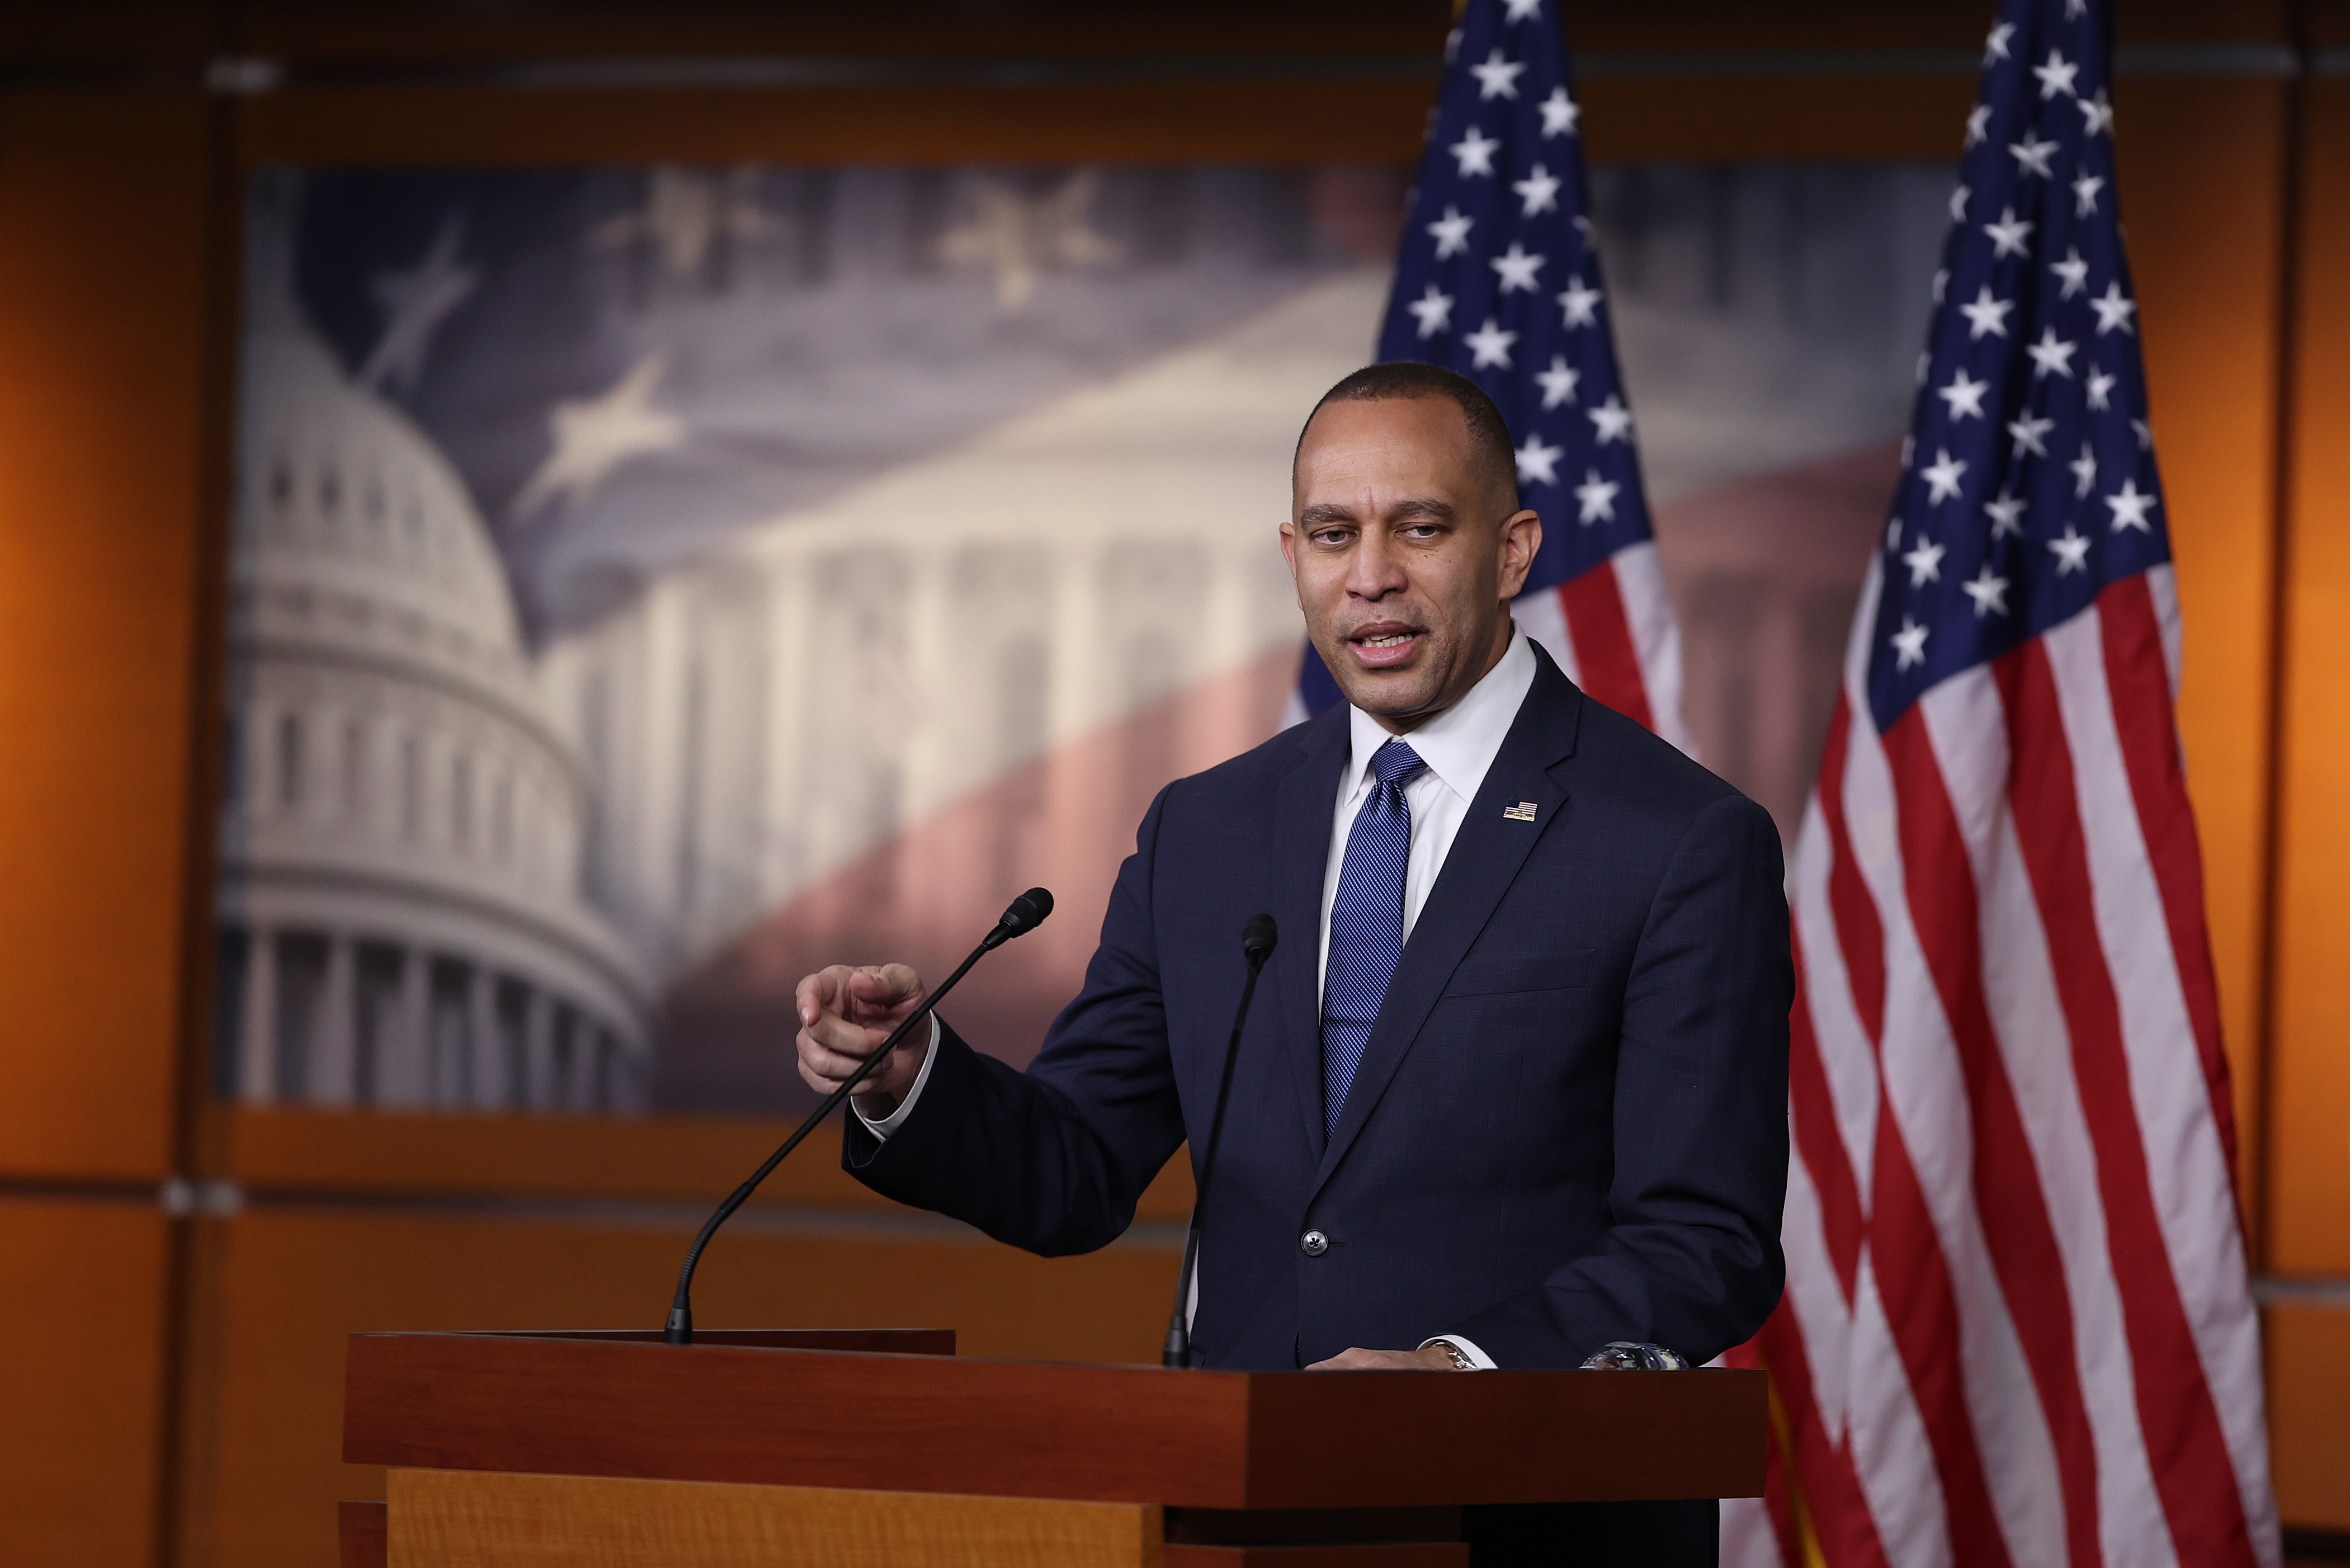 Rep. Hakeem Jeffries stands behind a lectern framed by two American flags.